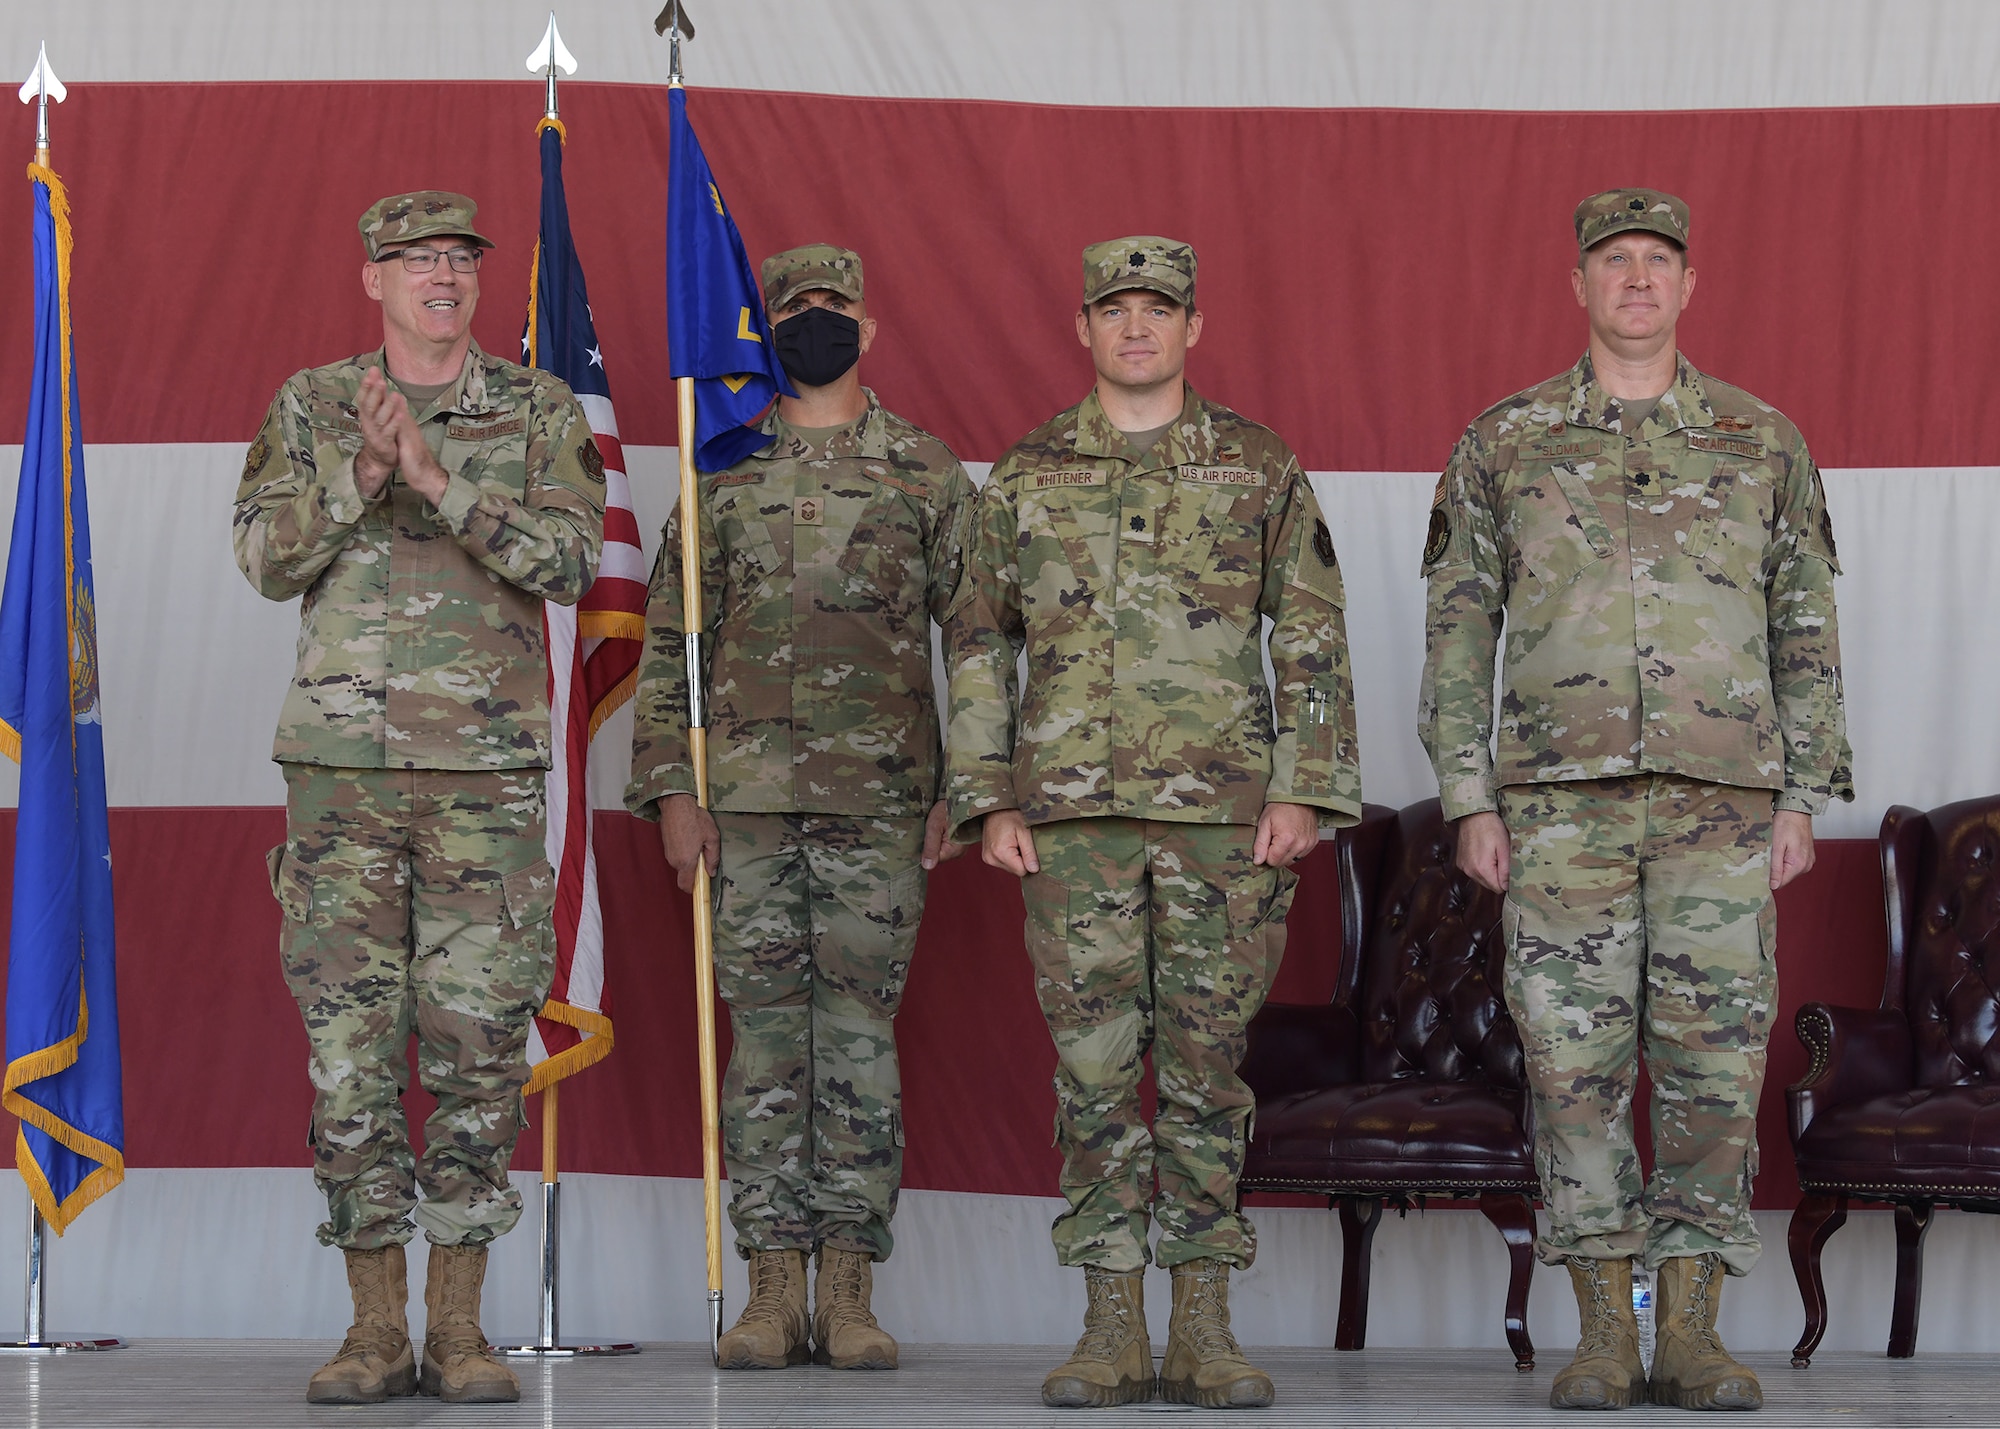 The 944th Logistics Readiness Squadron held a change of command ceremony at Luke Air Force Base, Arizona, October 2, 2021. Reserve Citizen Airman Lt. Col. Ronald J. ‘Smokin’ Sloma, 944th LRS outgoing commander, relinquished command to Reserve Citizen Airman Lt. Col. Jalen A. ‘Rex’ Whitener, in-coming commander, in front of family, friends, and military members.